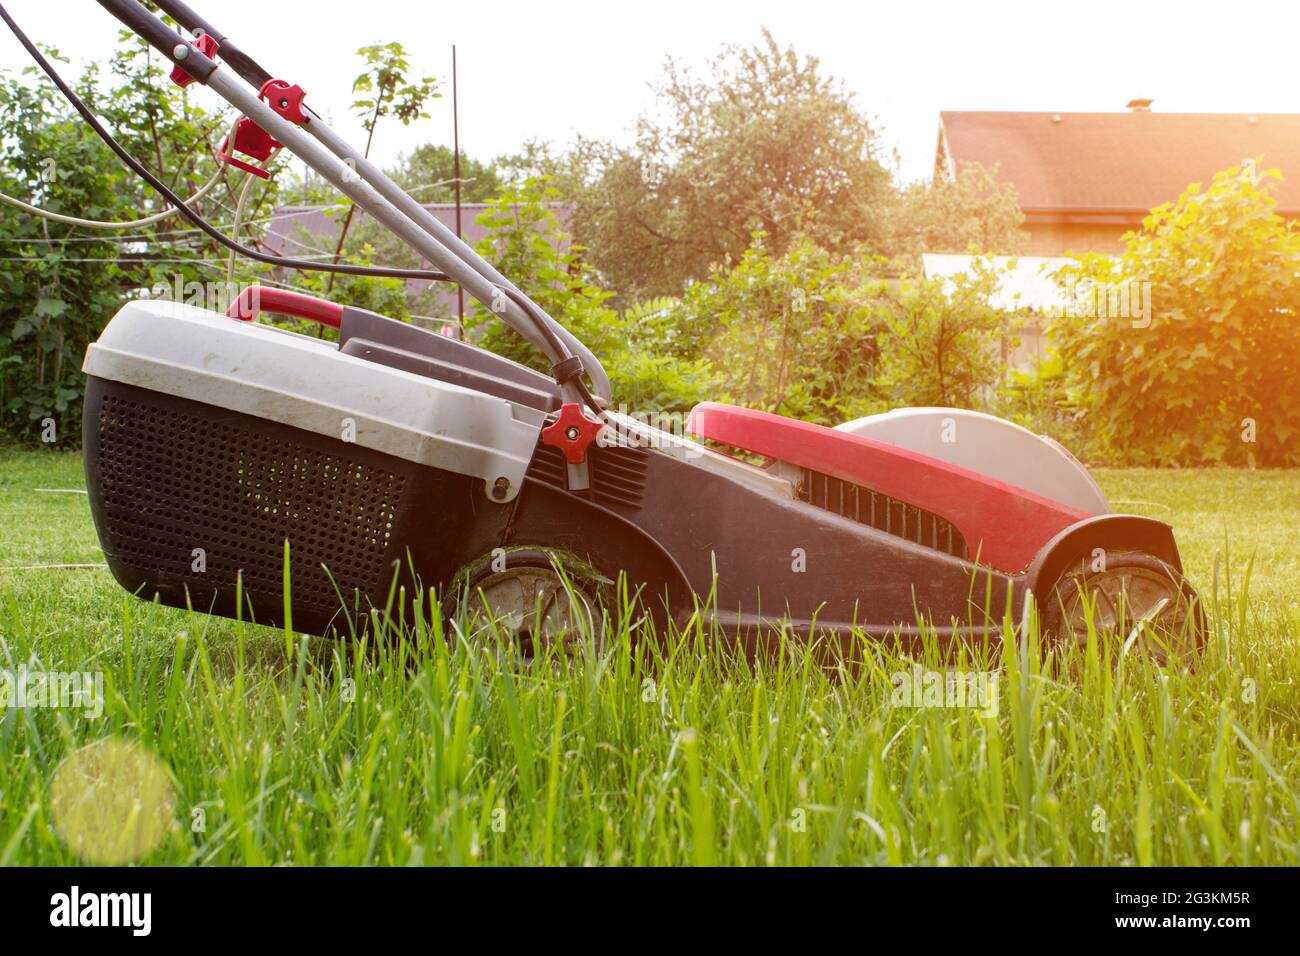 Cutting Grass A lawn mower on a lush green. Gardening and landscaping concept. Stock Photo